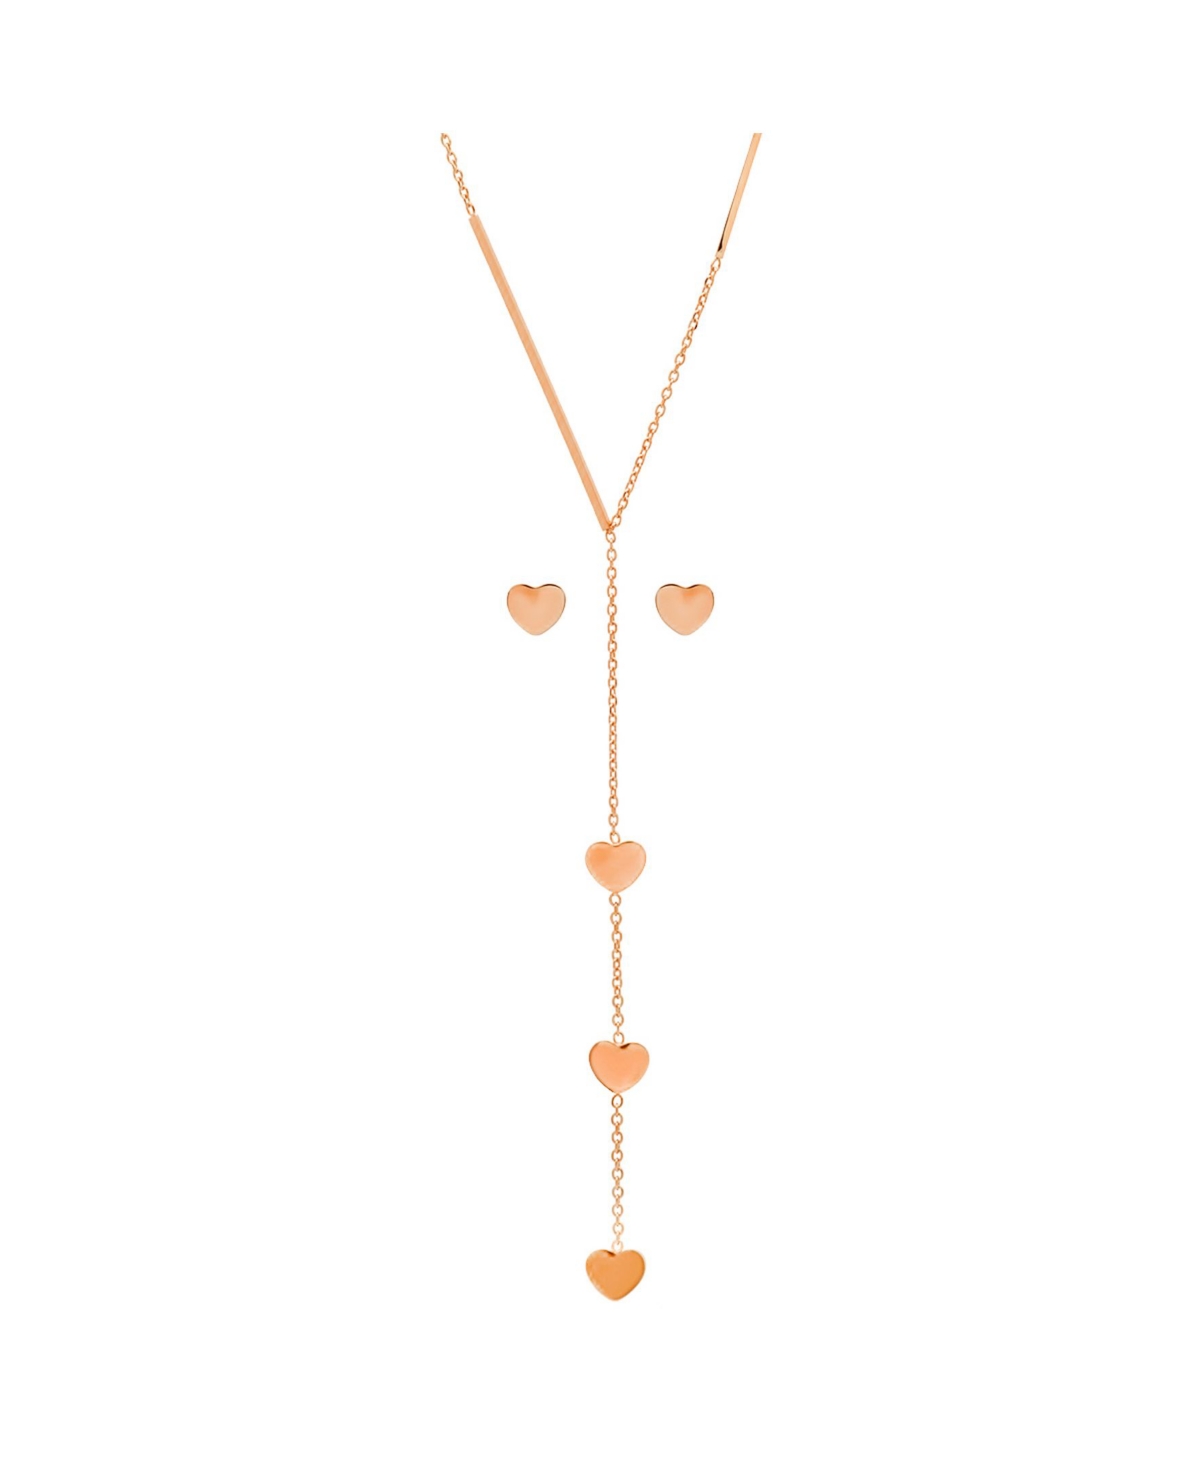 Ladies 18K Rose Gold Plated Stainless Steel Heart Design Drop Necklace Set, 2 Piece - Rose Gold-Plated